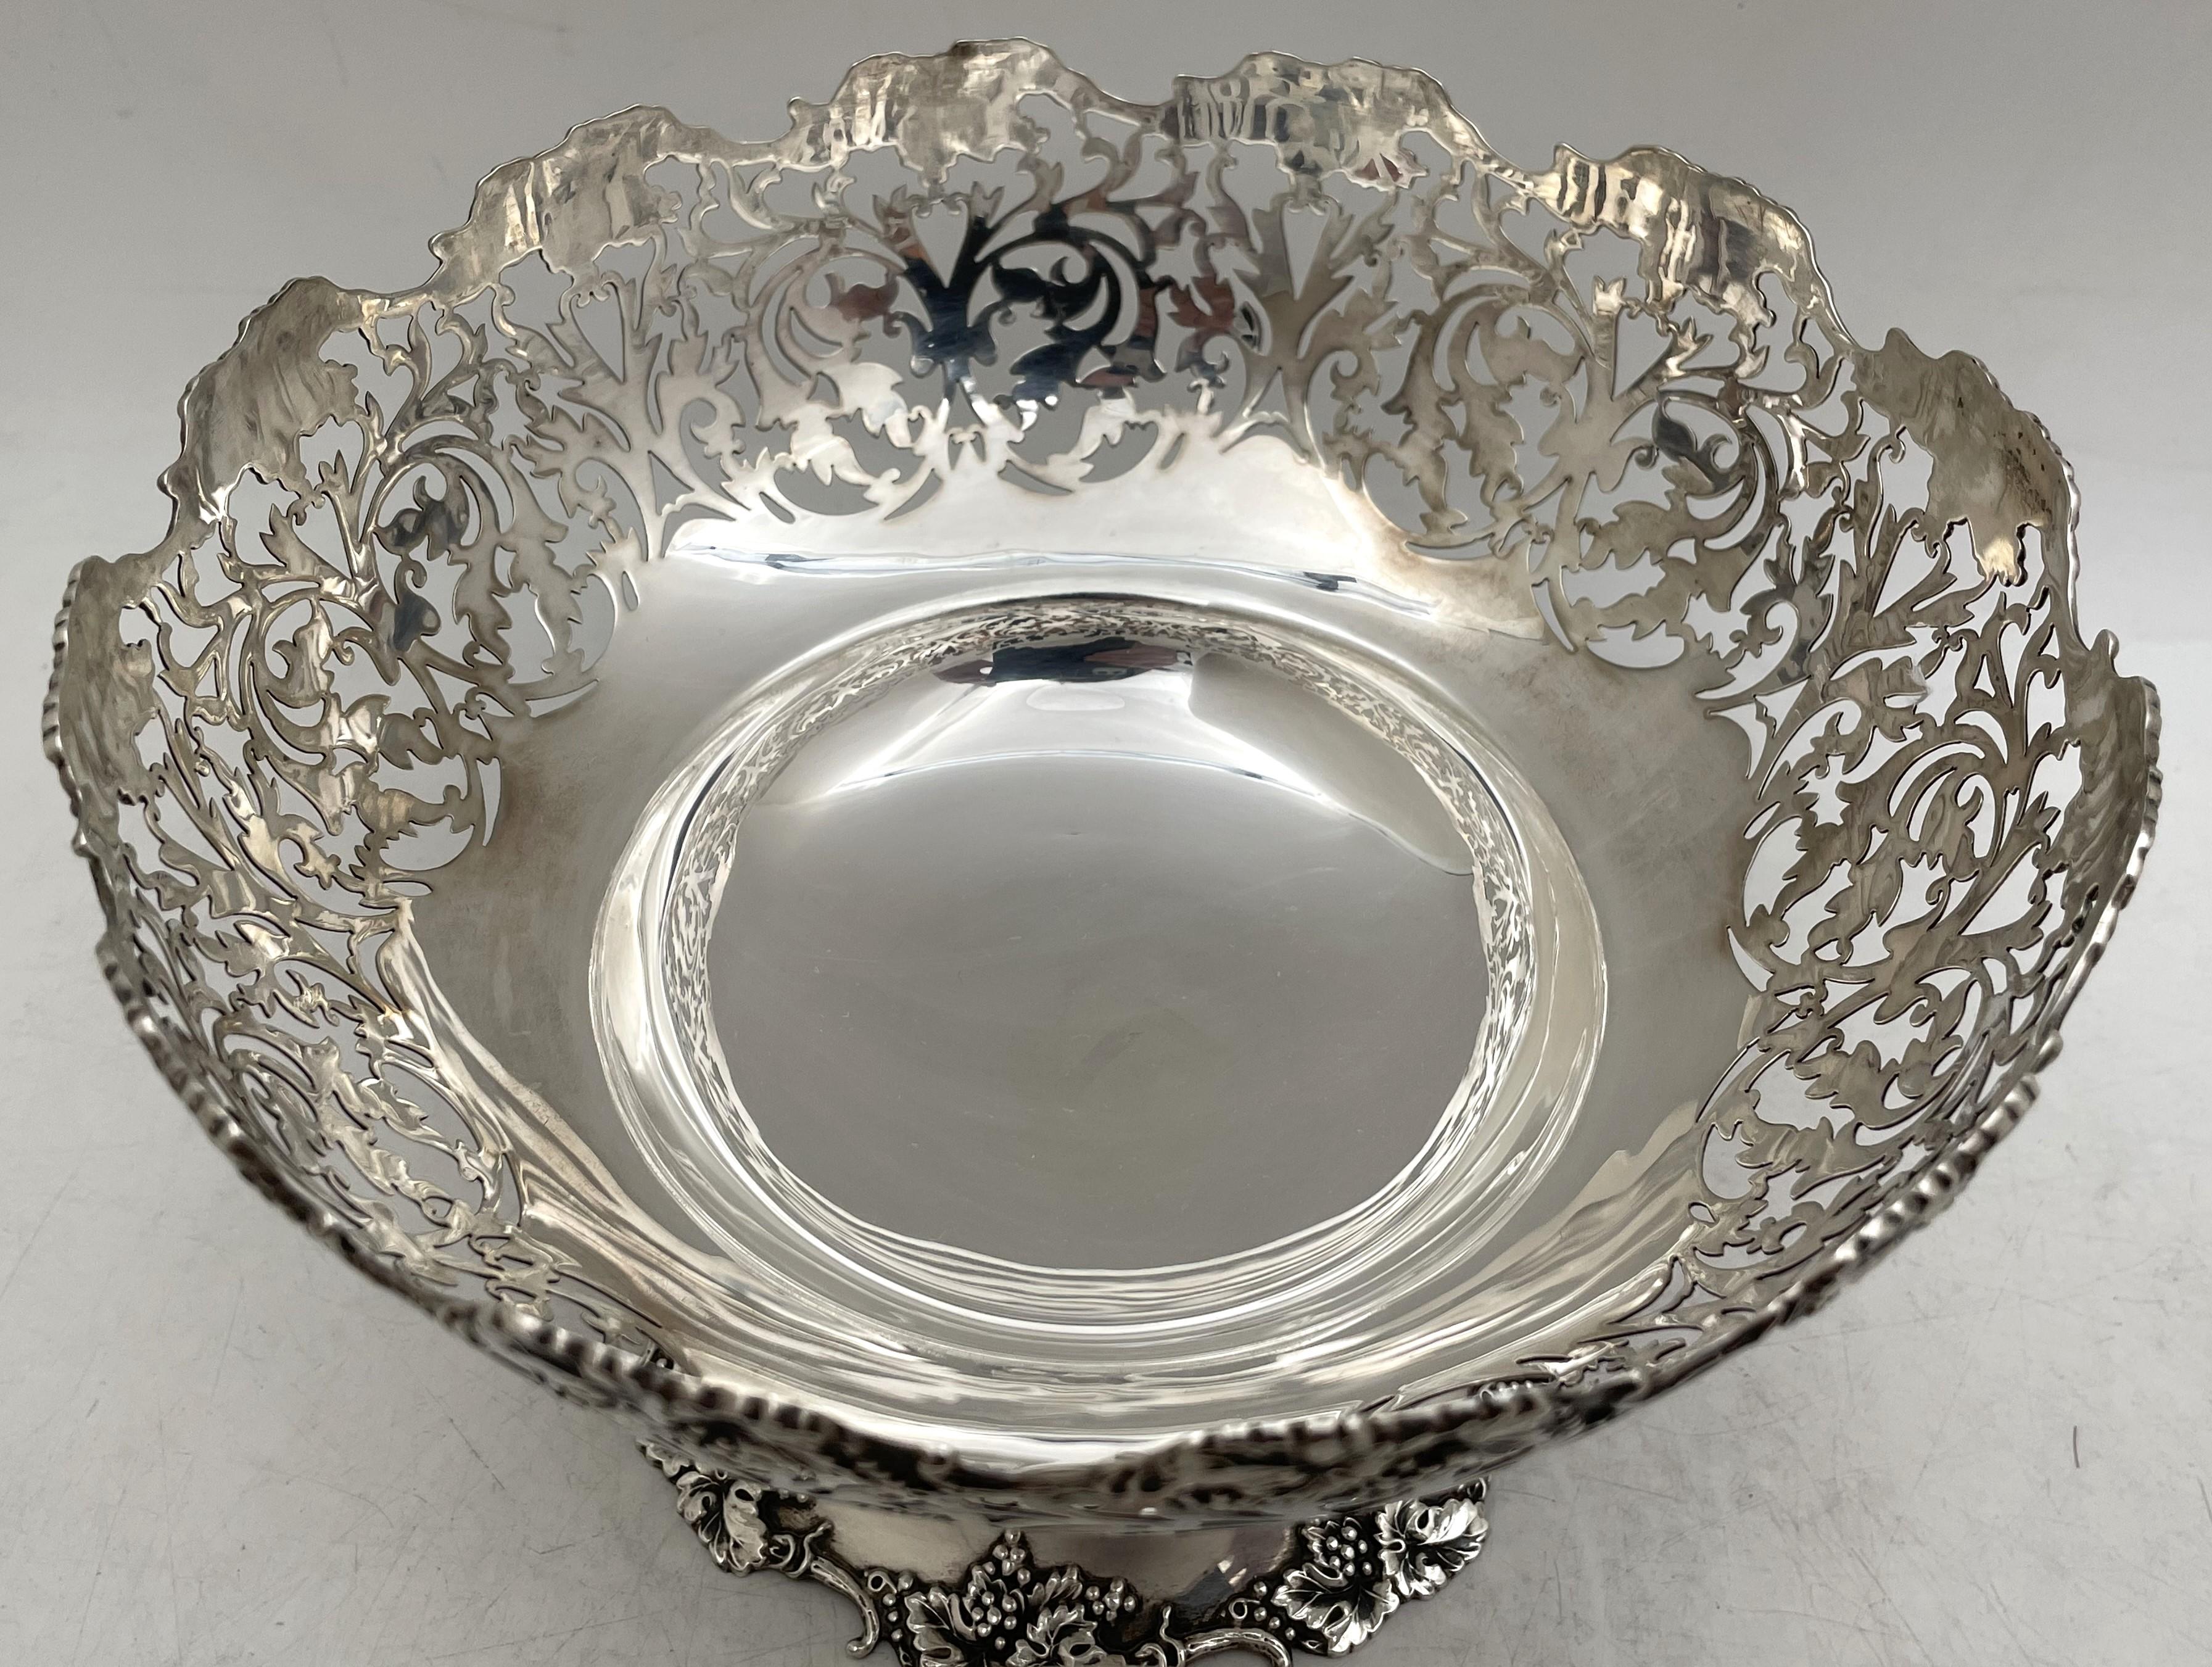 Walker & Hall English Sterling Silver & Glass 1930 Punch Bowl Set with 4 Cups For Sale 1